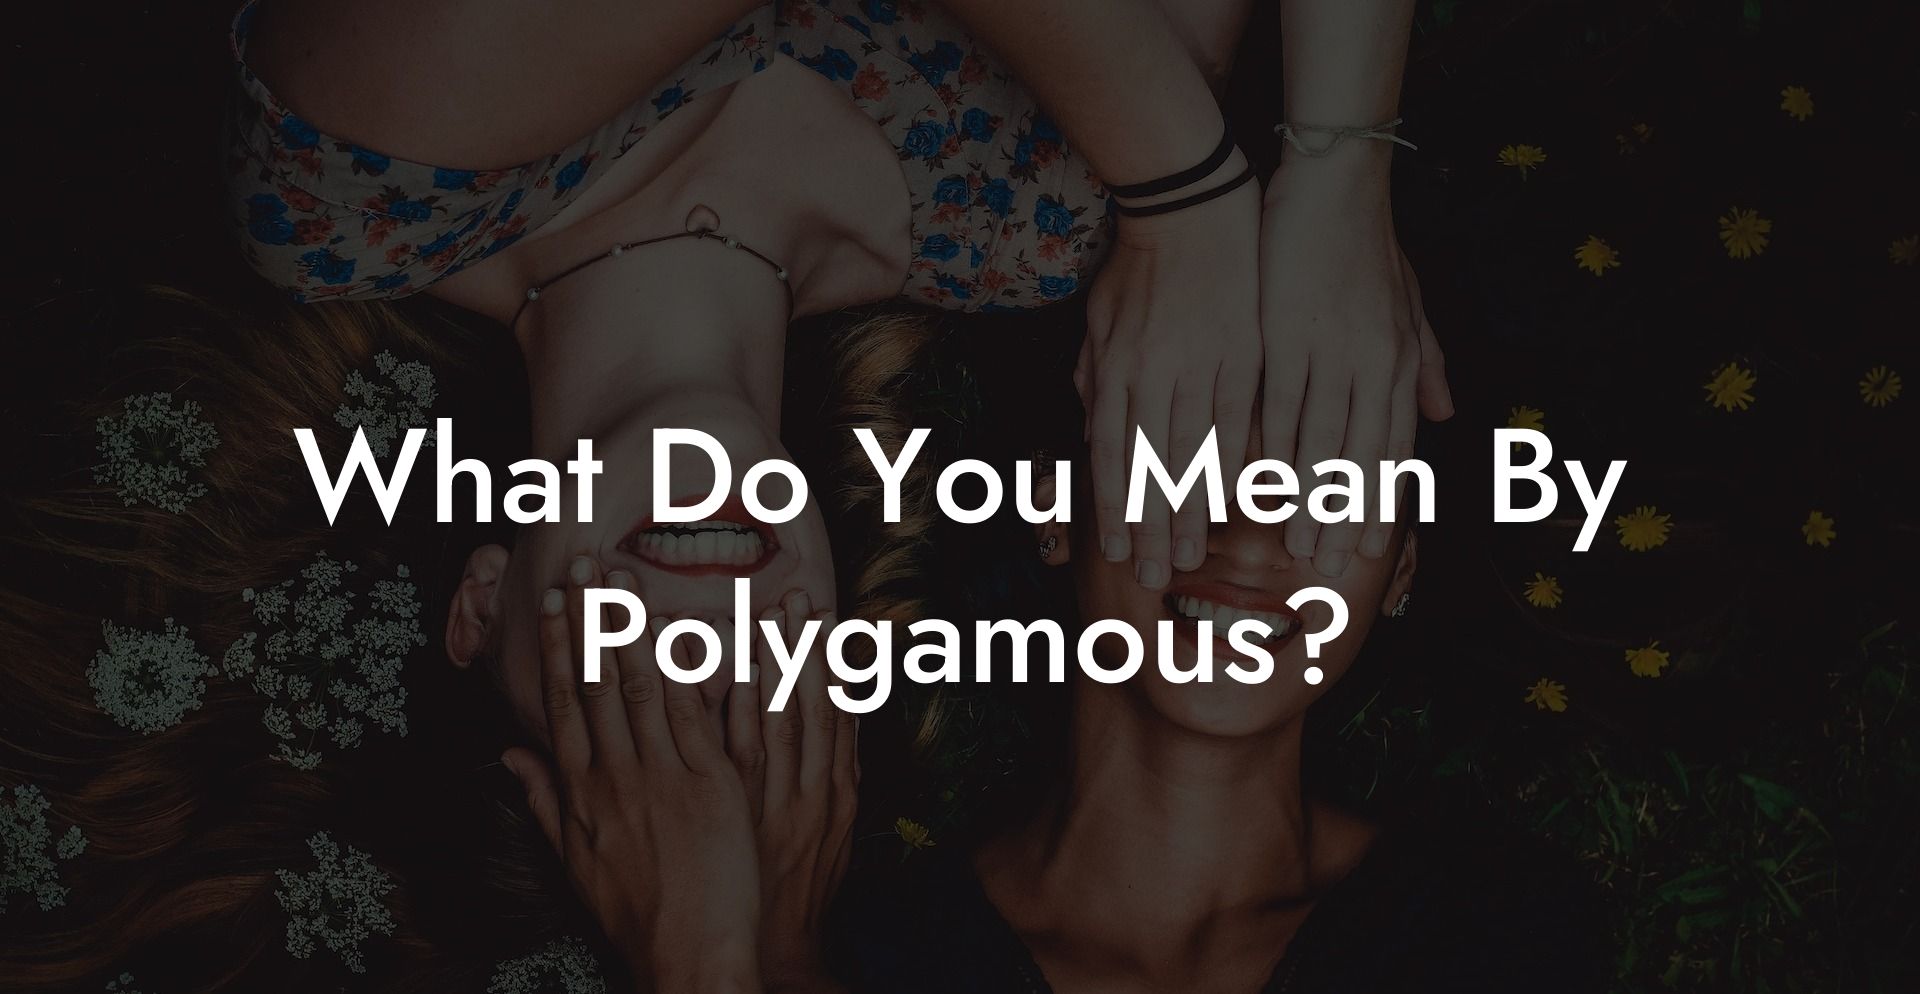 What Do You Mean By Polygamous?